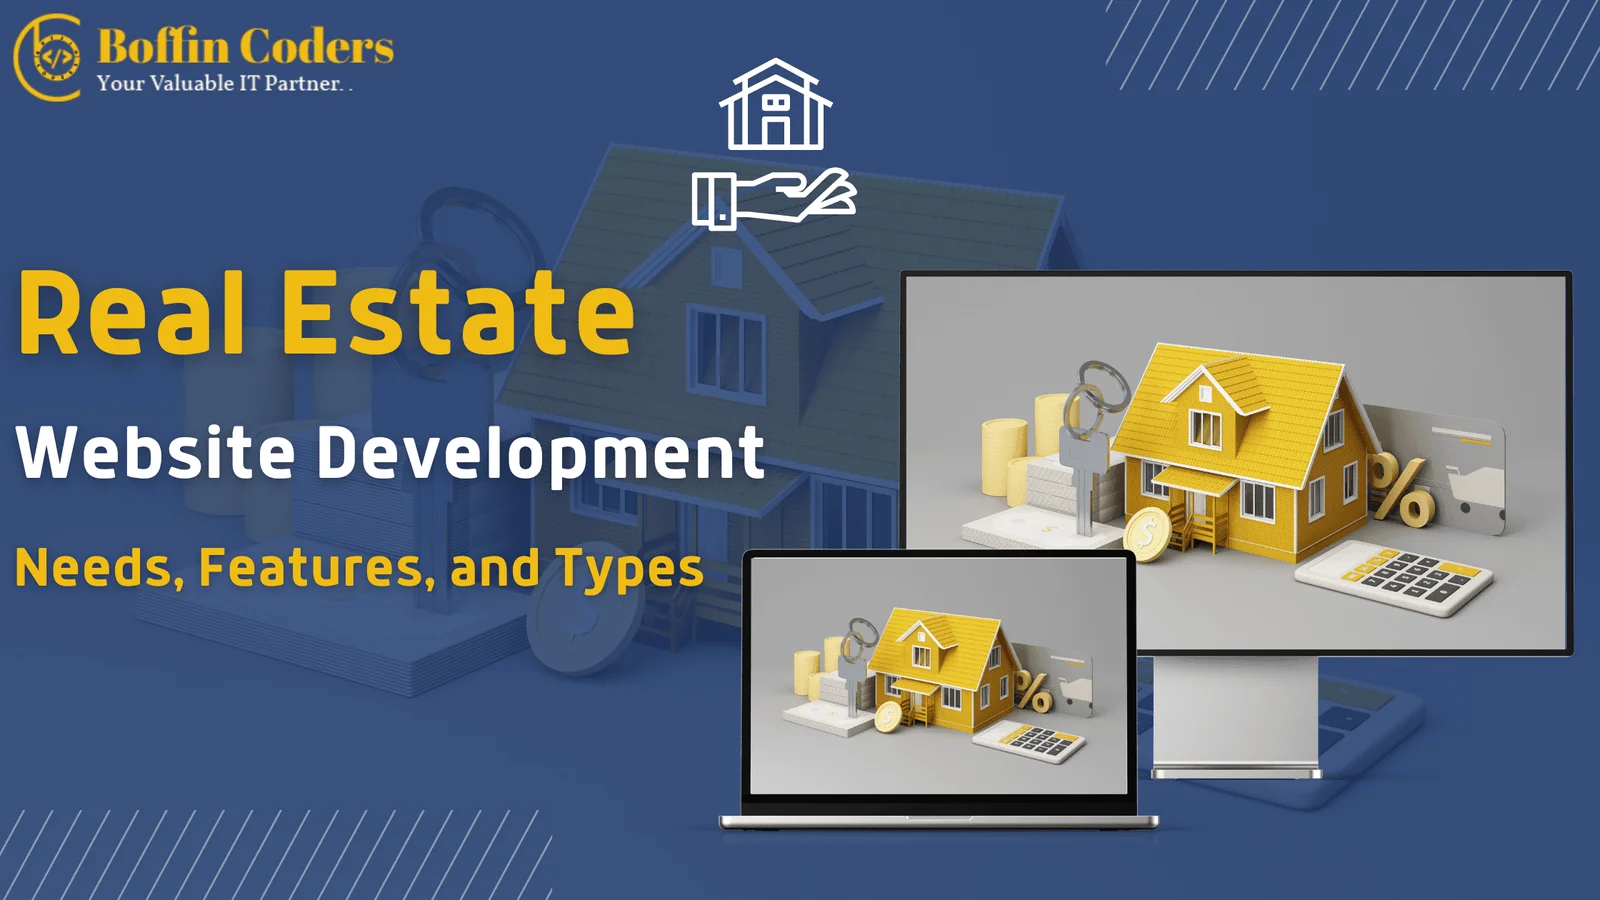 Real Estate Website Development: Needs, Features, and Types